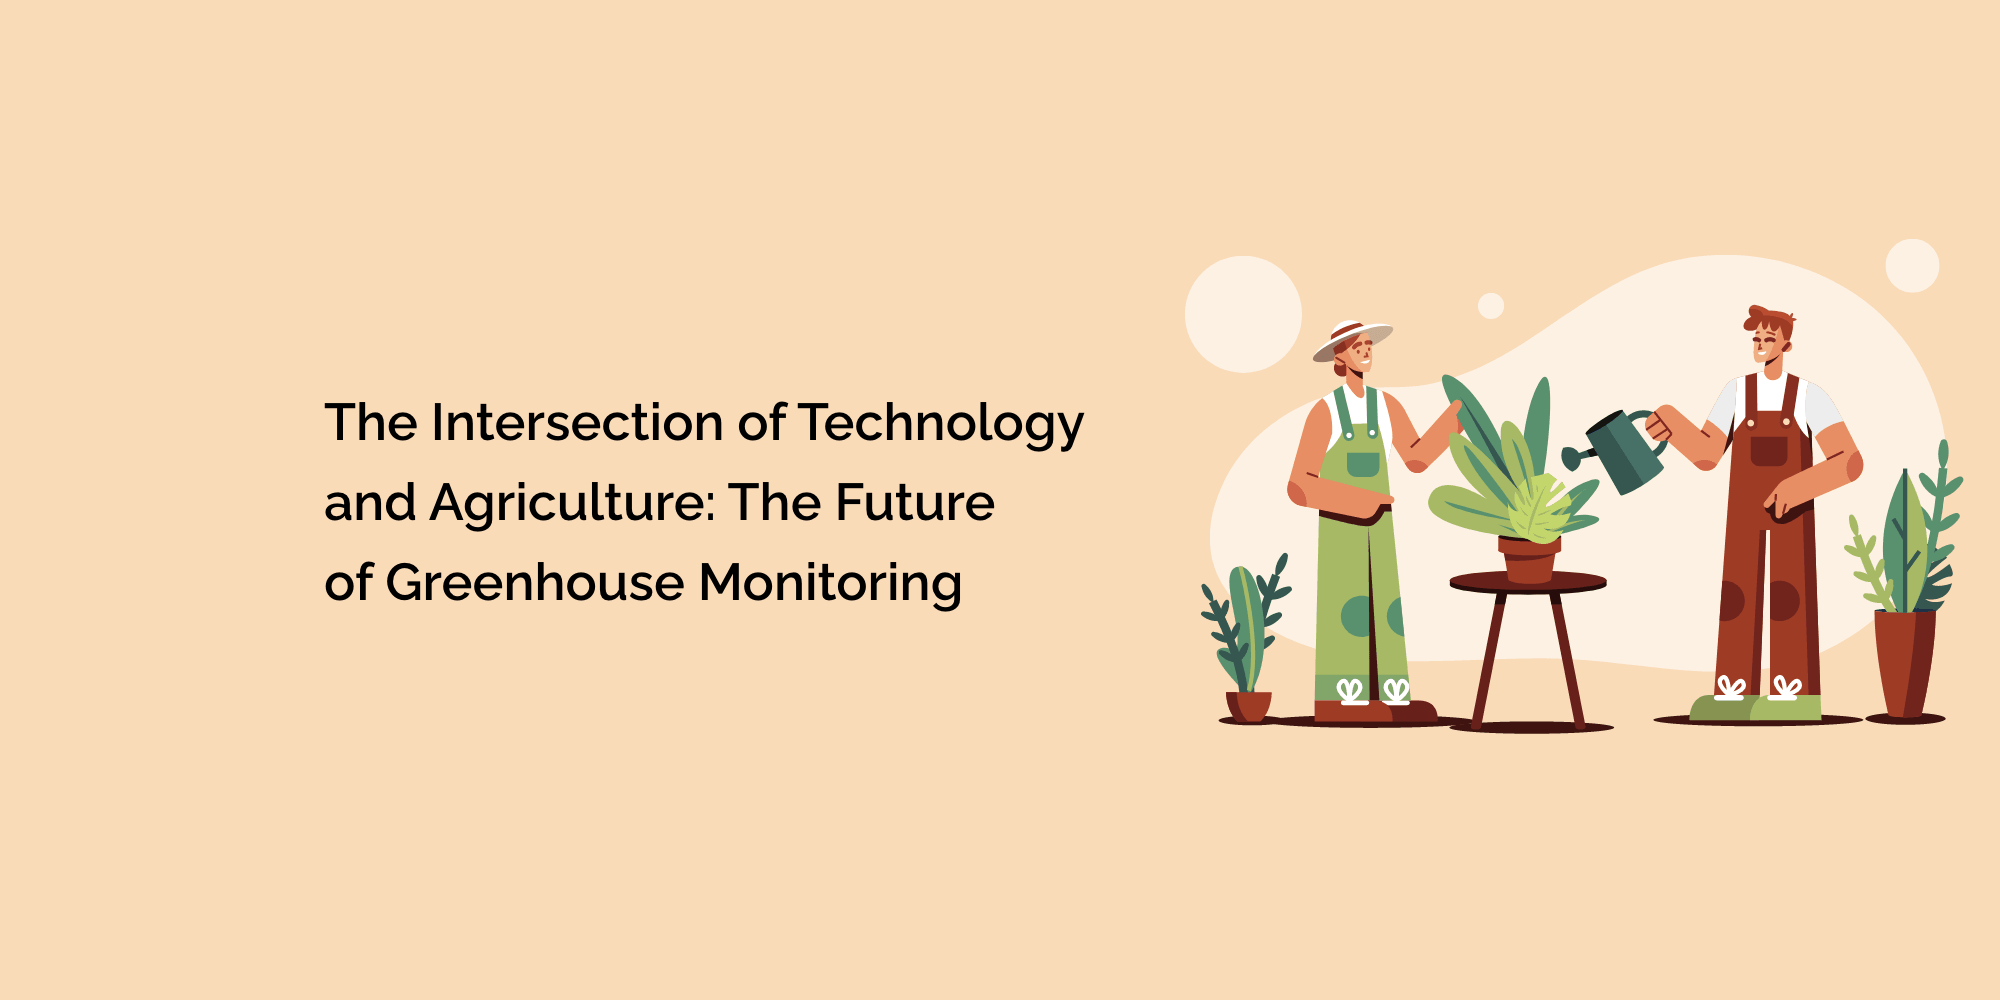 The Intersection of Technology and Agriculture: The Future of Greenhouse Monitoring